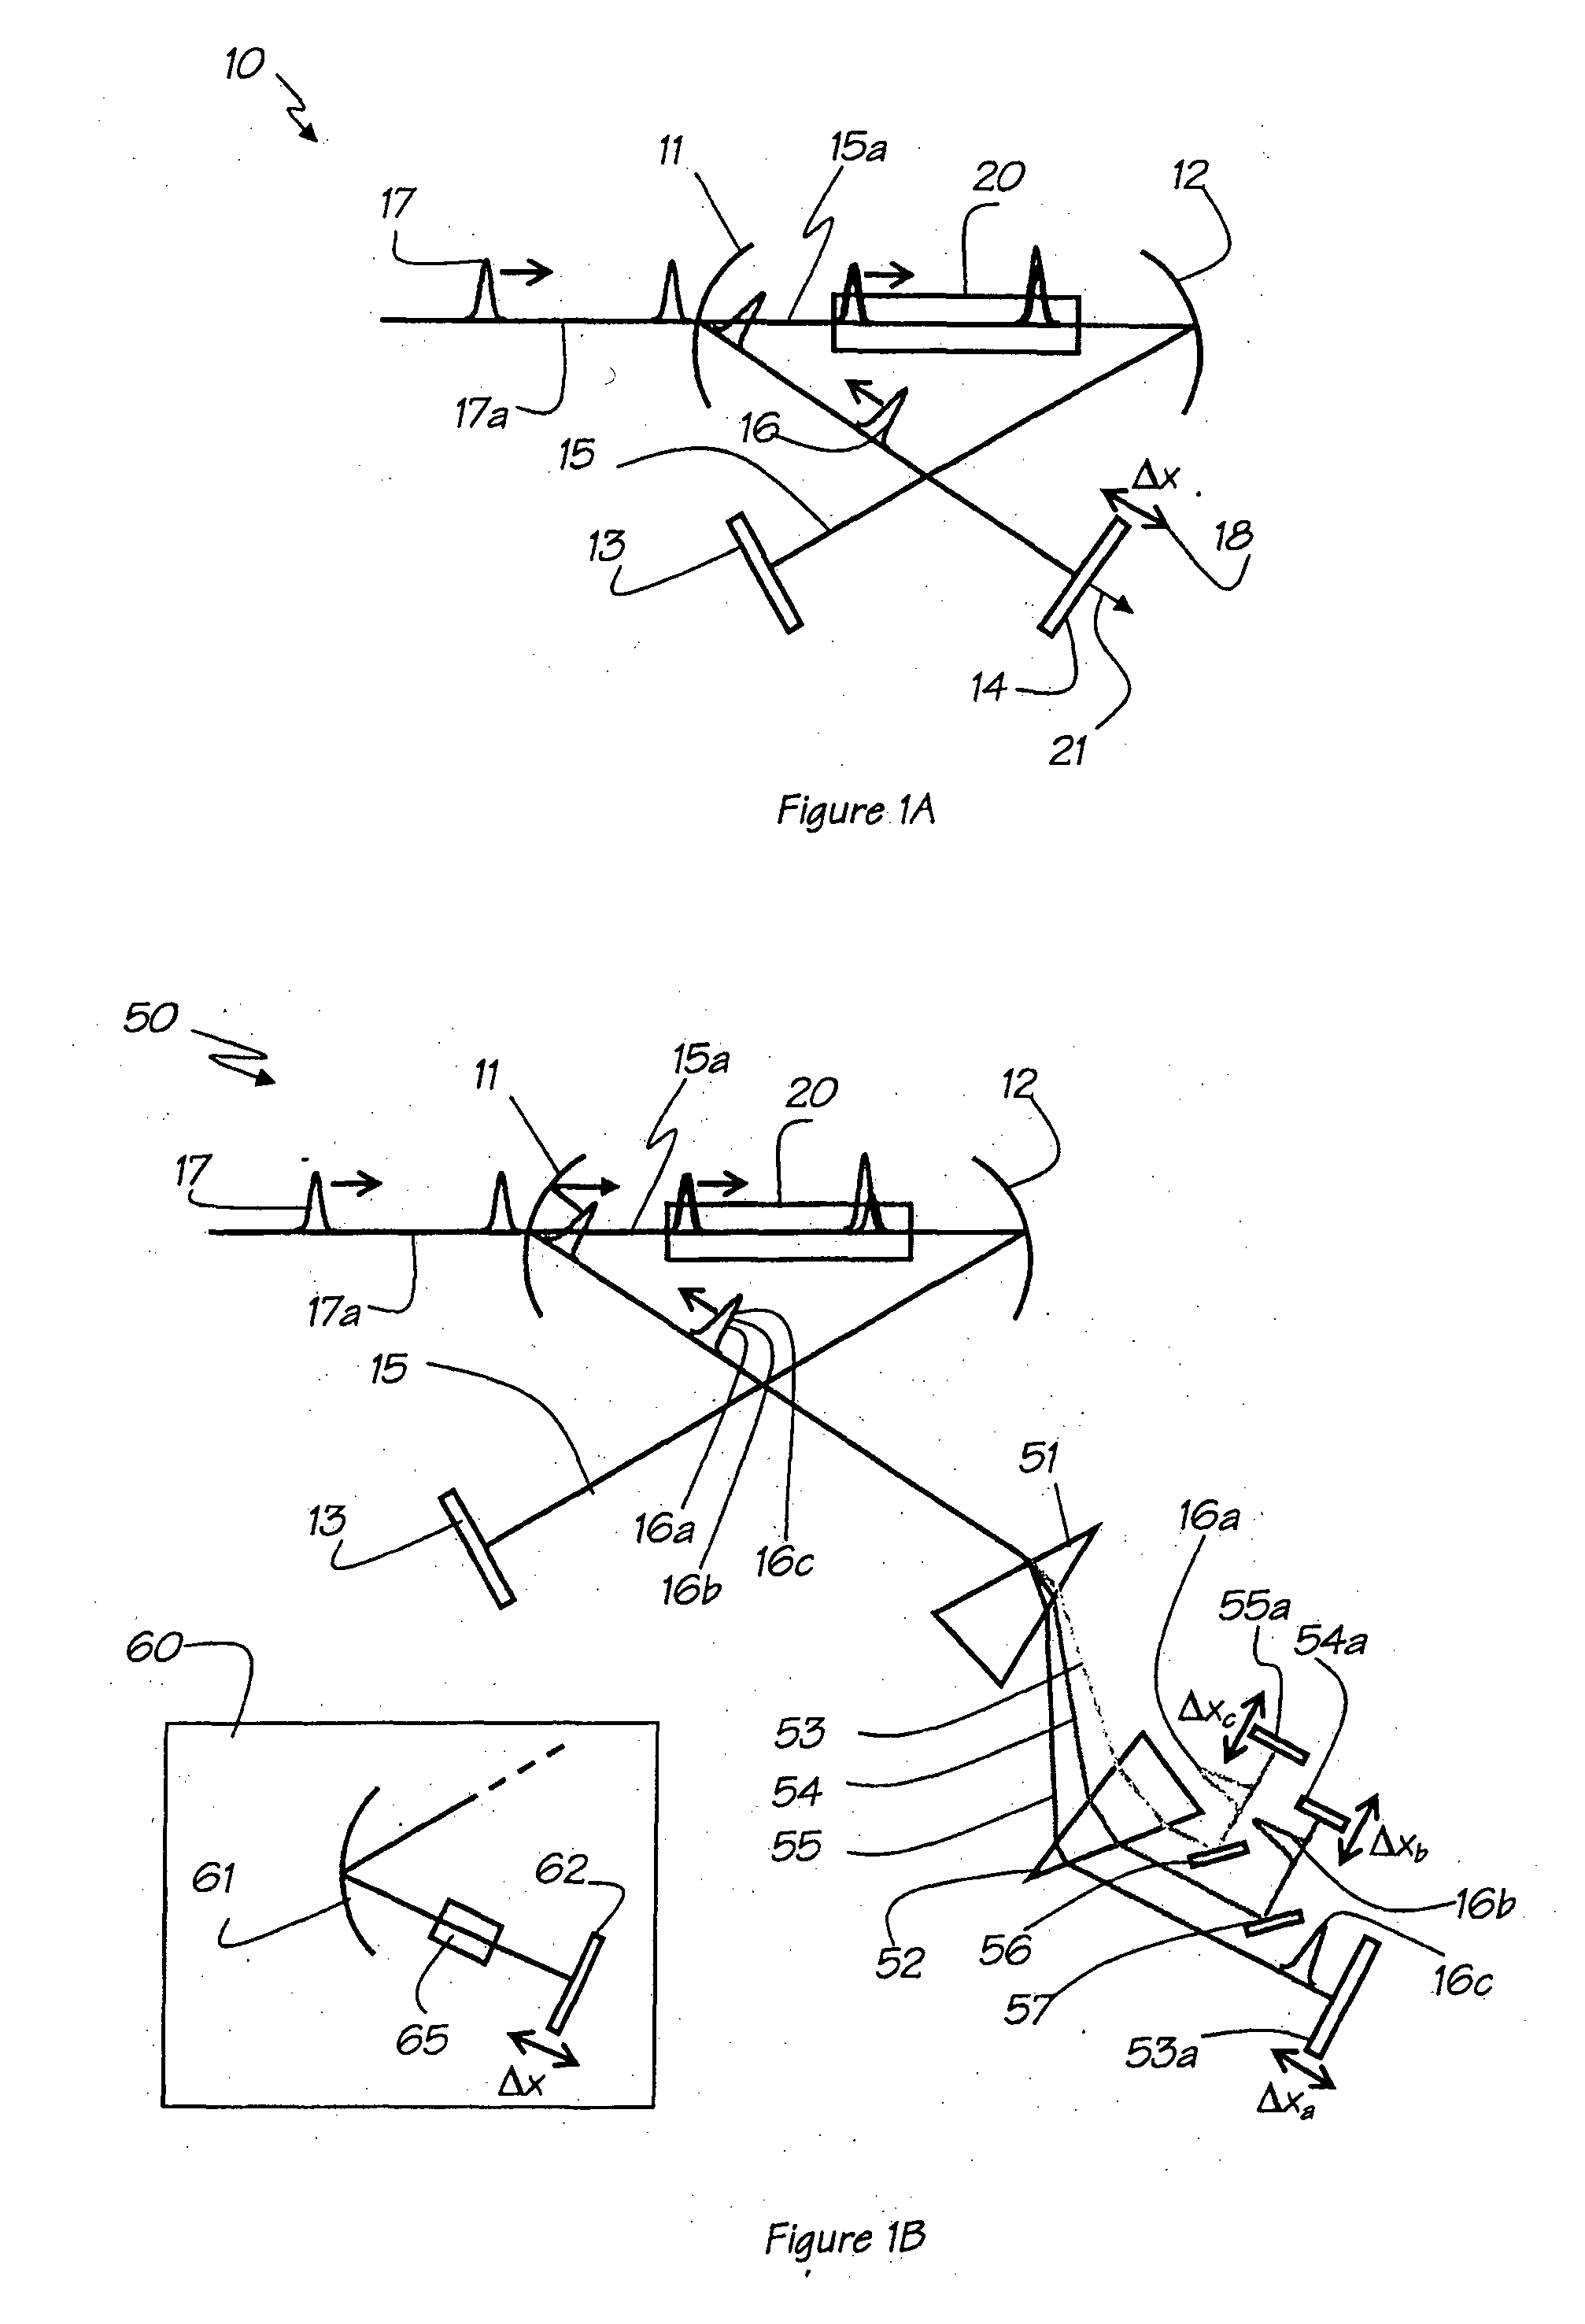 Ultrafast raman laser systems and methods of operation